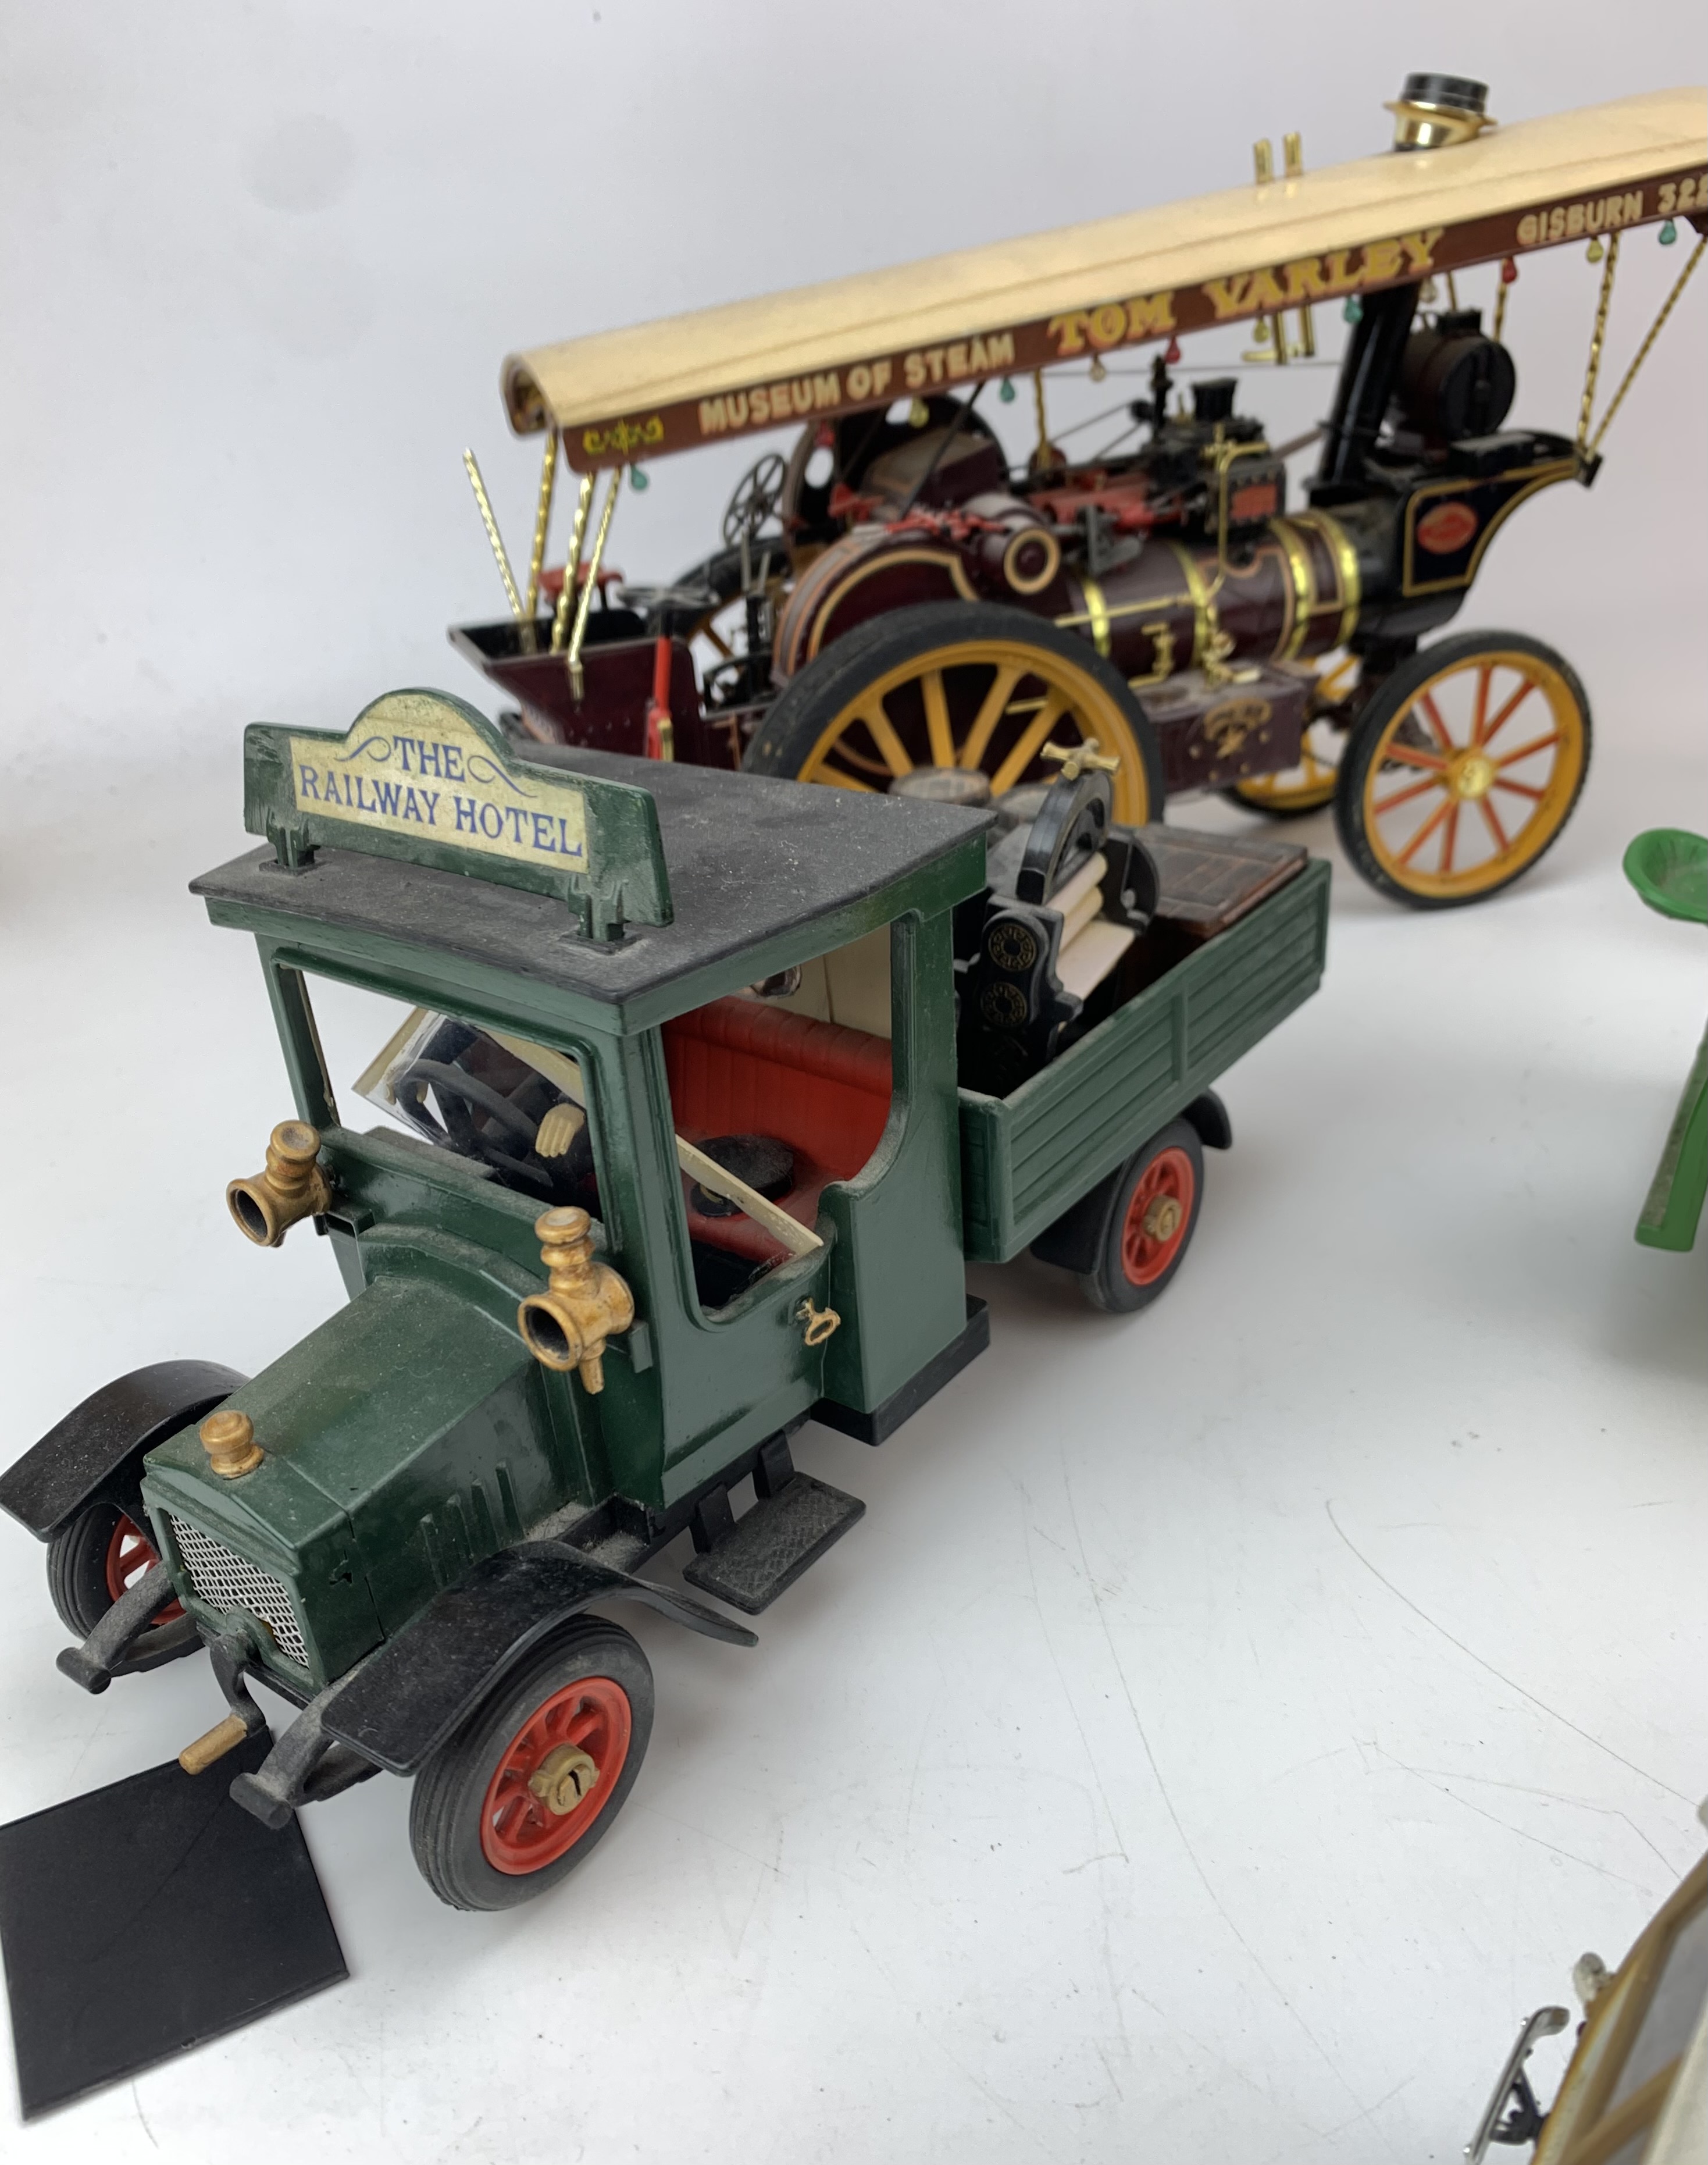 5 loose model cars, boxed Gate Mazda NX5, model Museum of Steam Tom Varley and Waterloo Boy tractor - Image 5 of 17